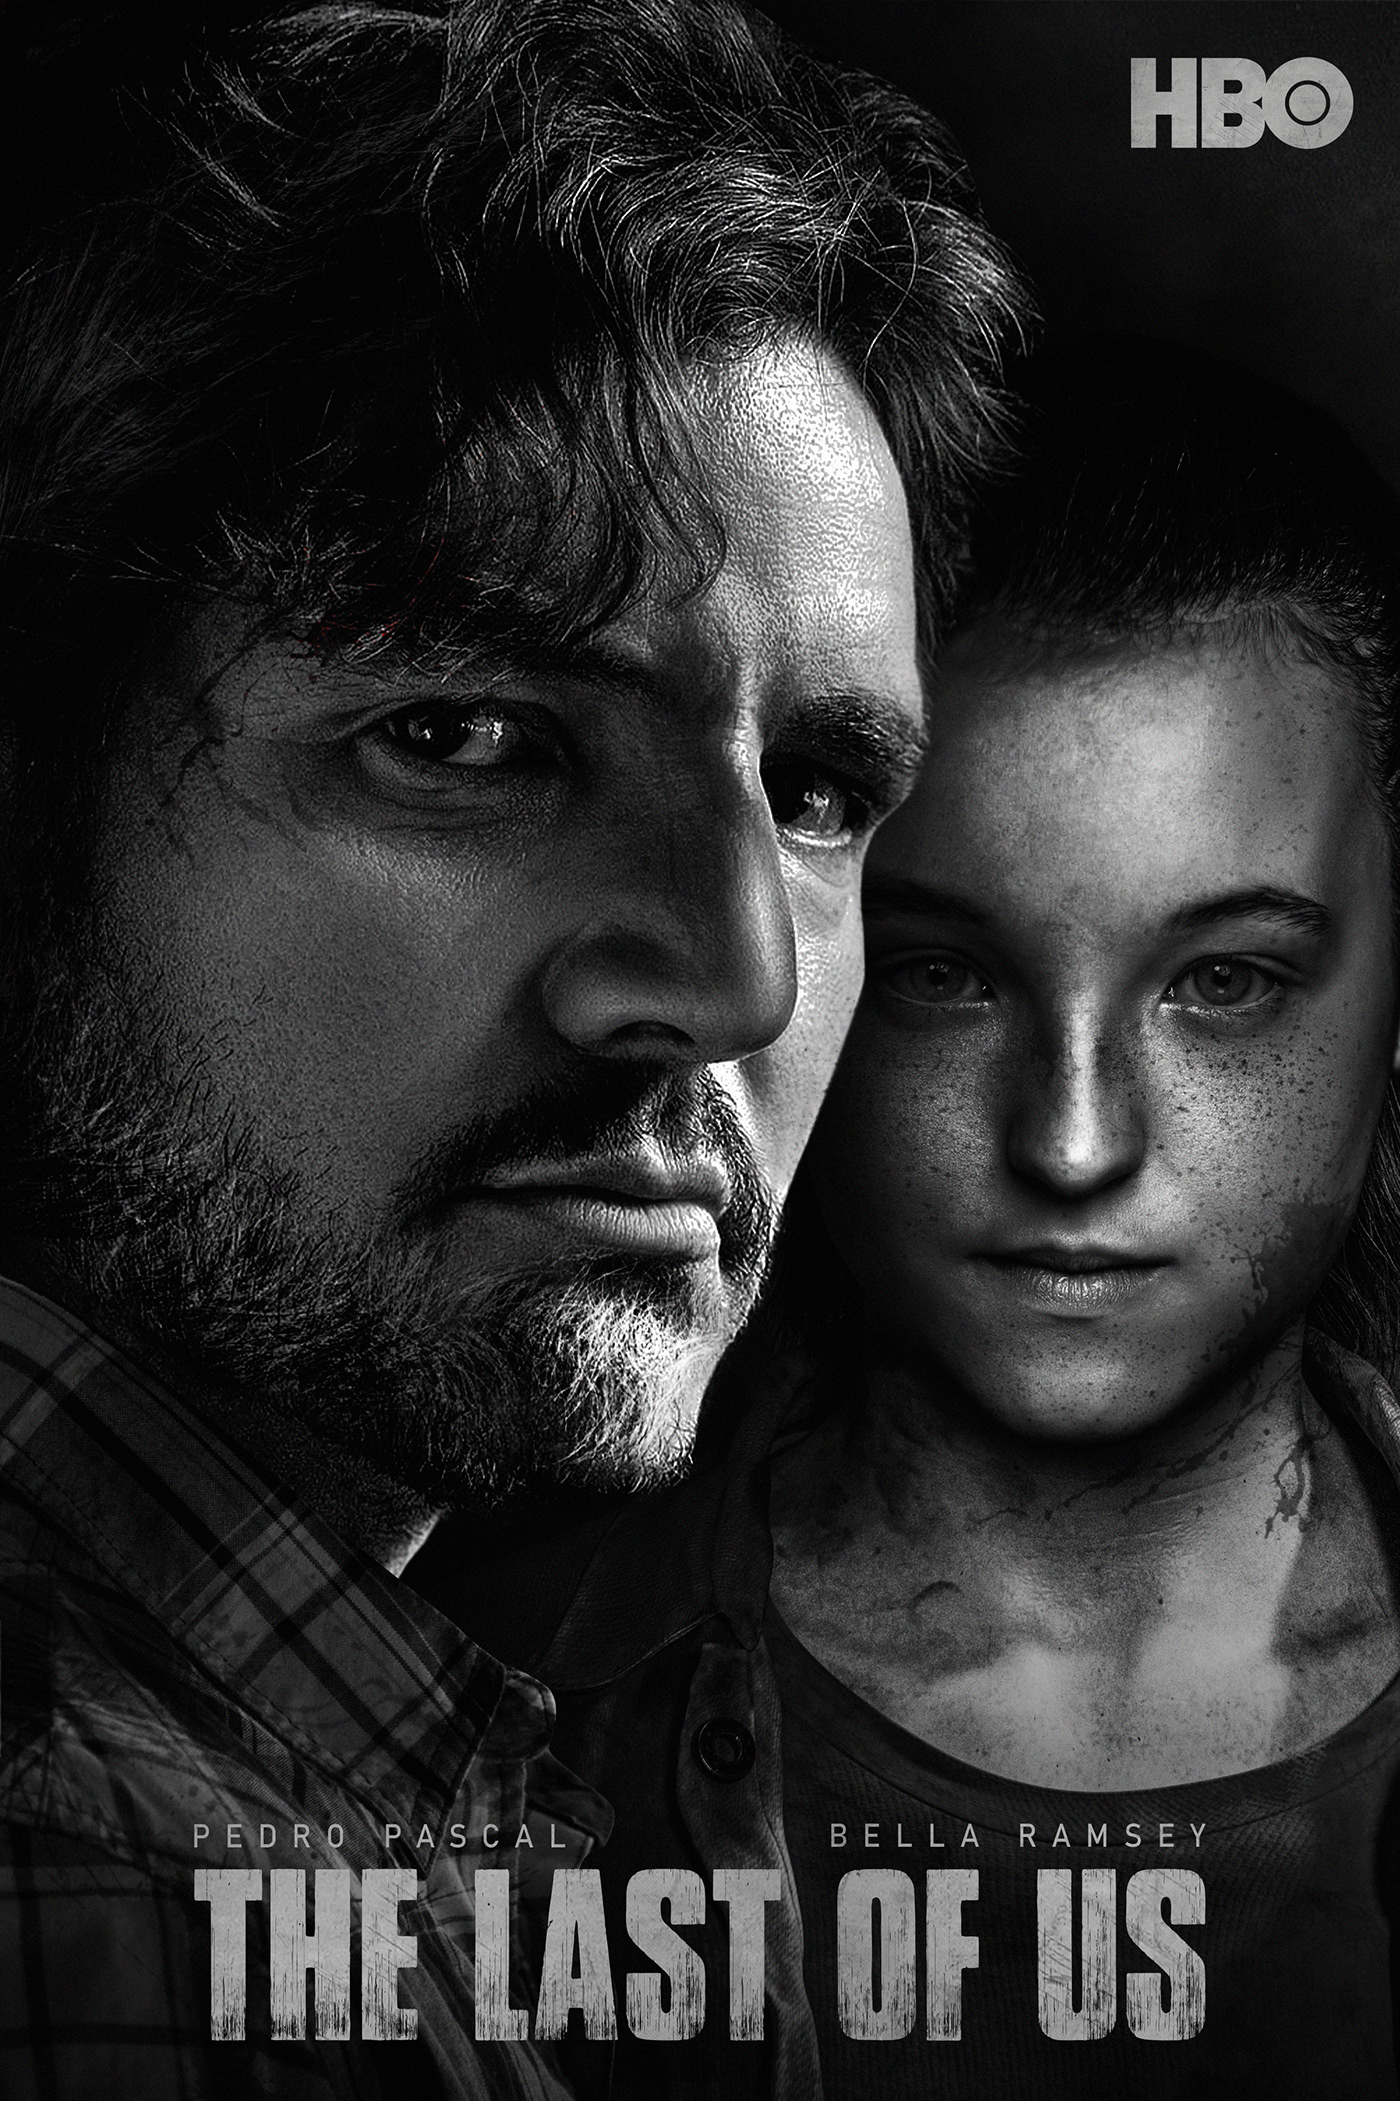 Fan Art game hbo last of us movie poster poster art tv show